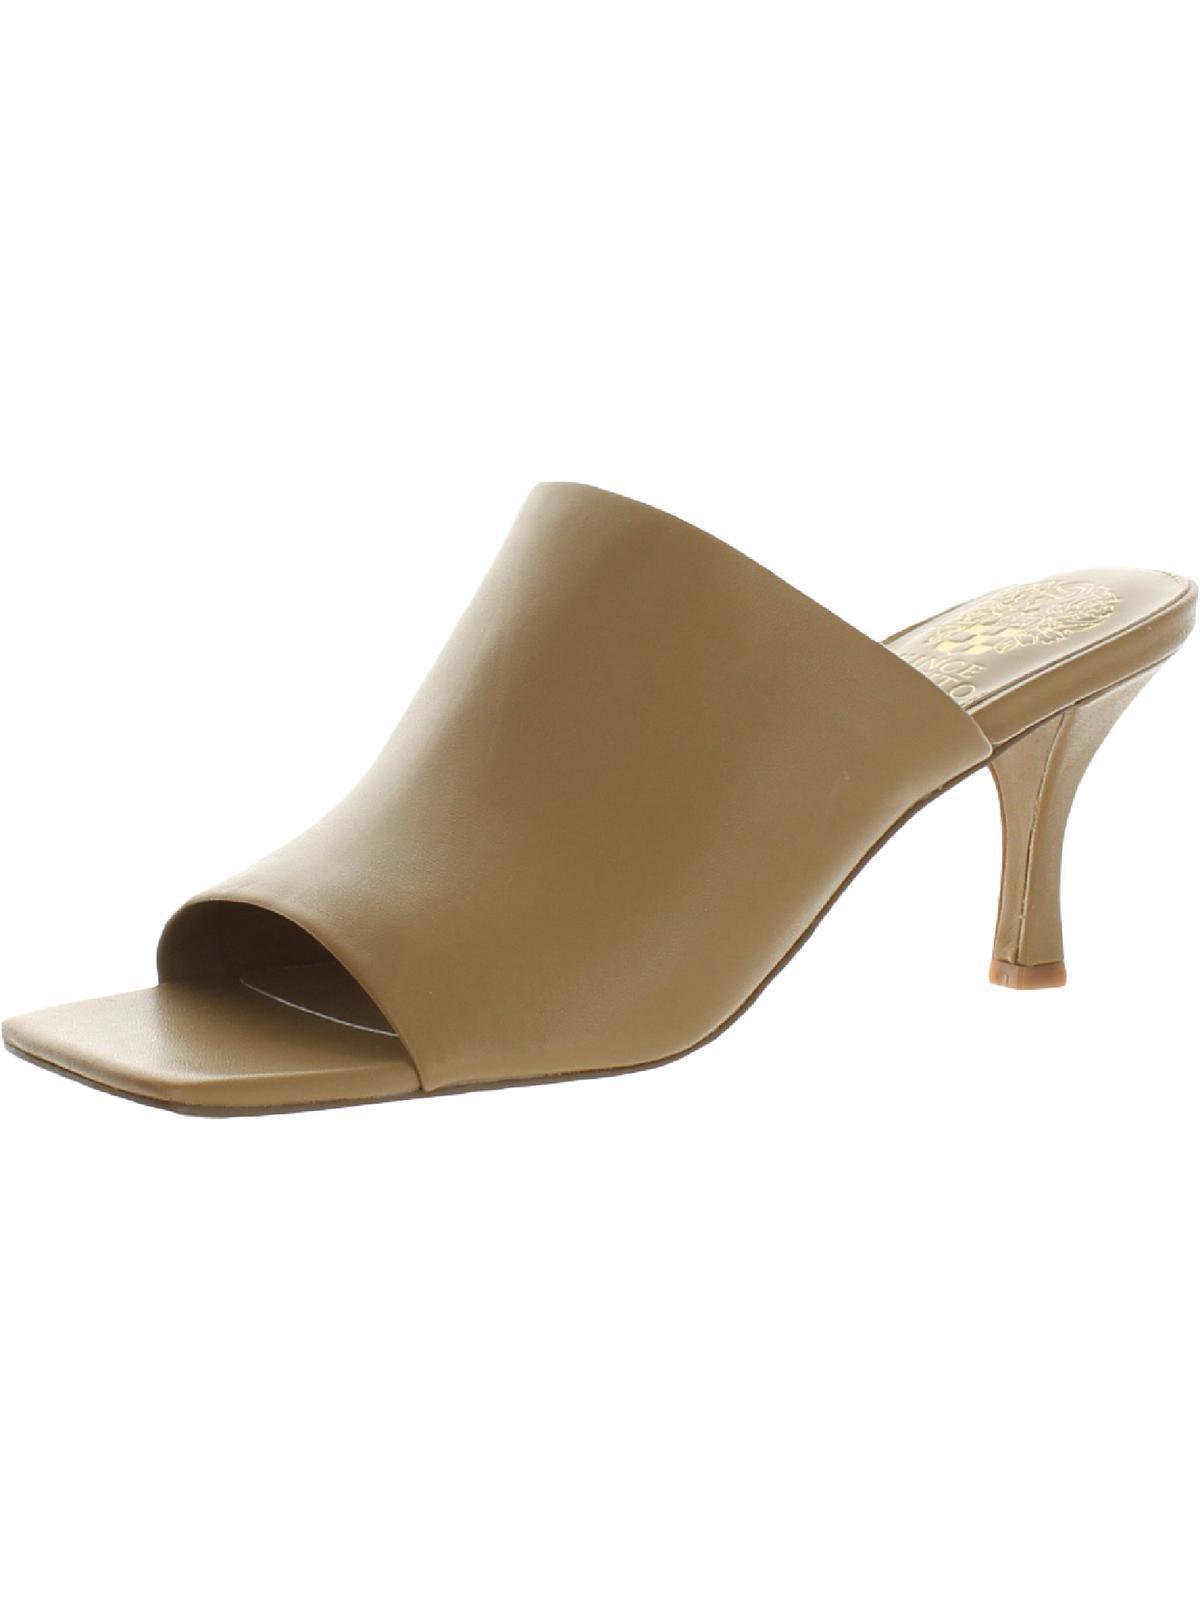 Vince Camuto Arlinala Leather Square Toe Mule Sandals in Natural | Lyst